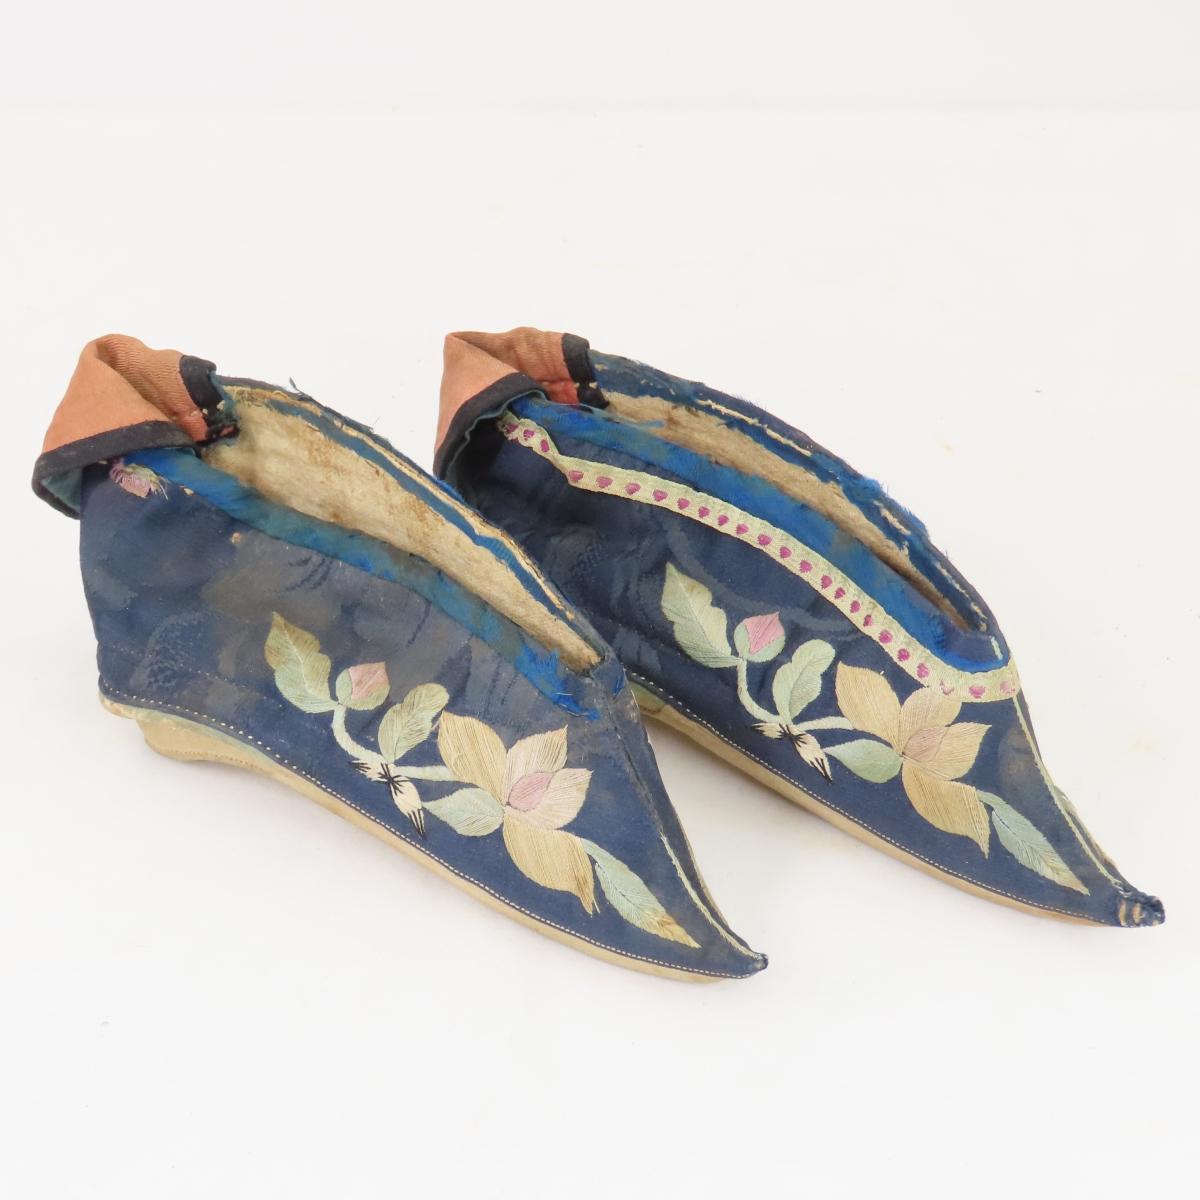 Antique Chinese foot binding shoes